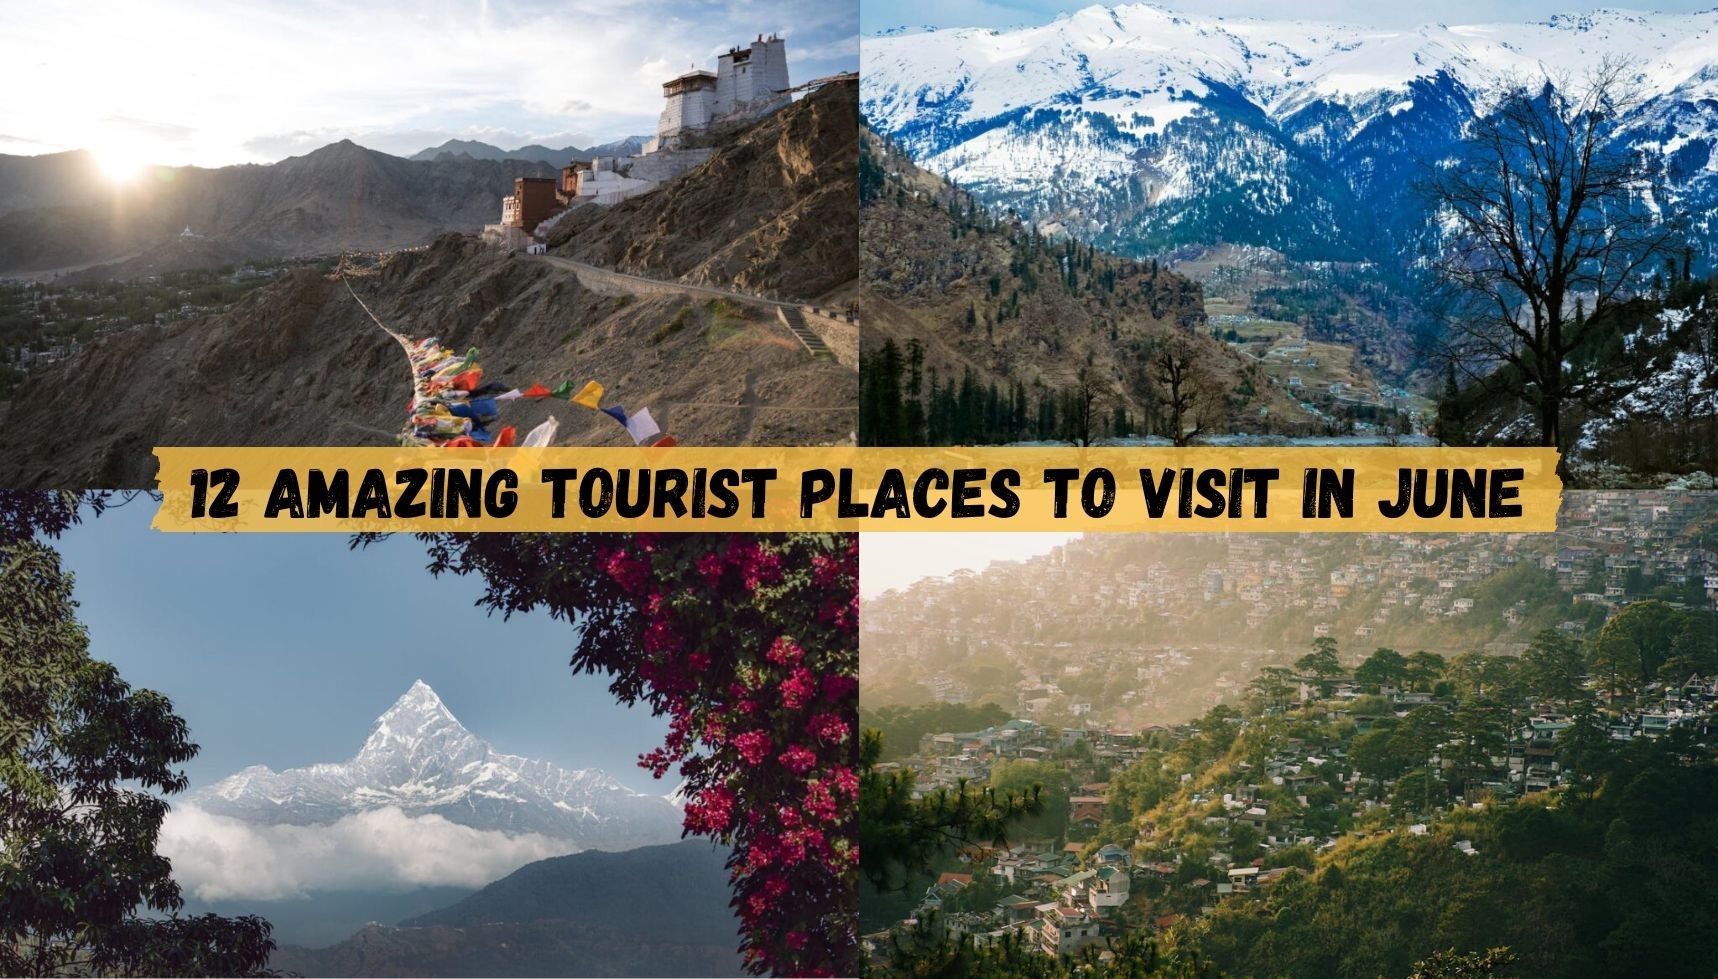 12 Amazing Tourist Places to Visit in June